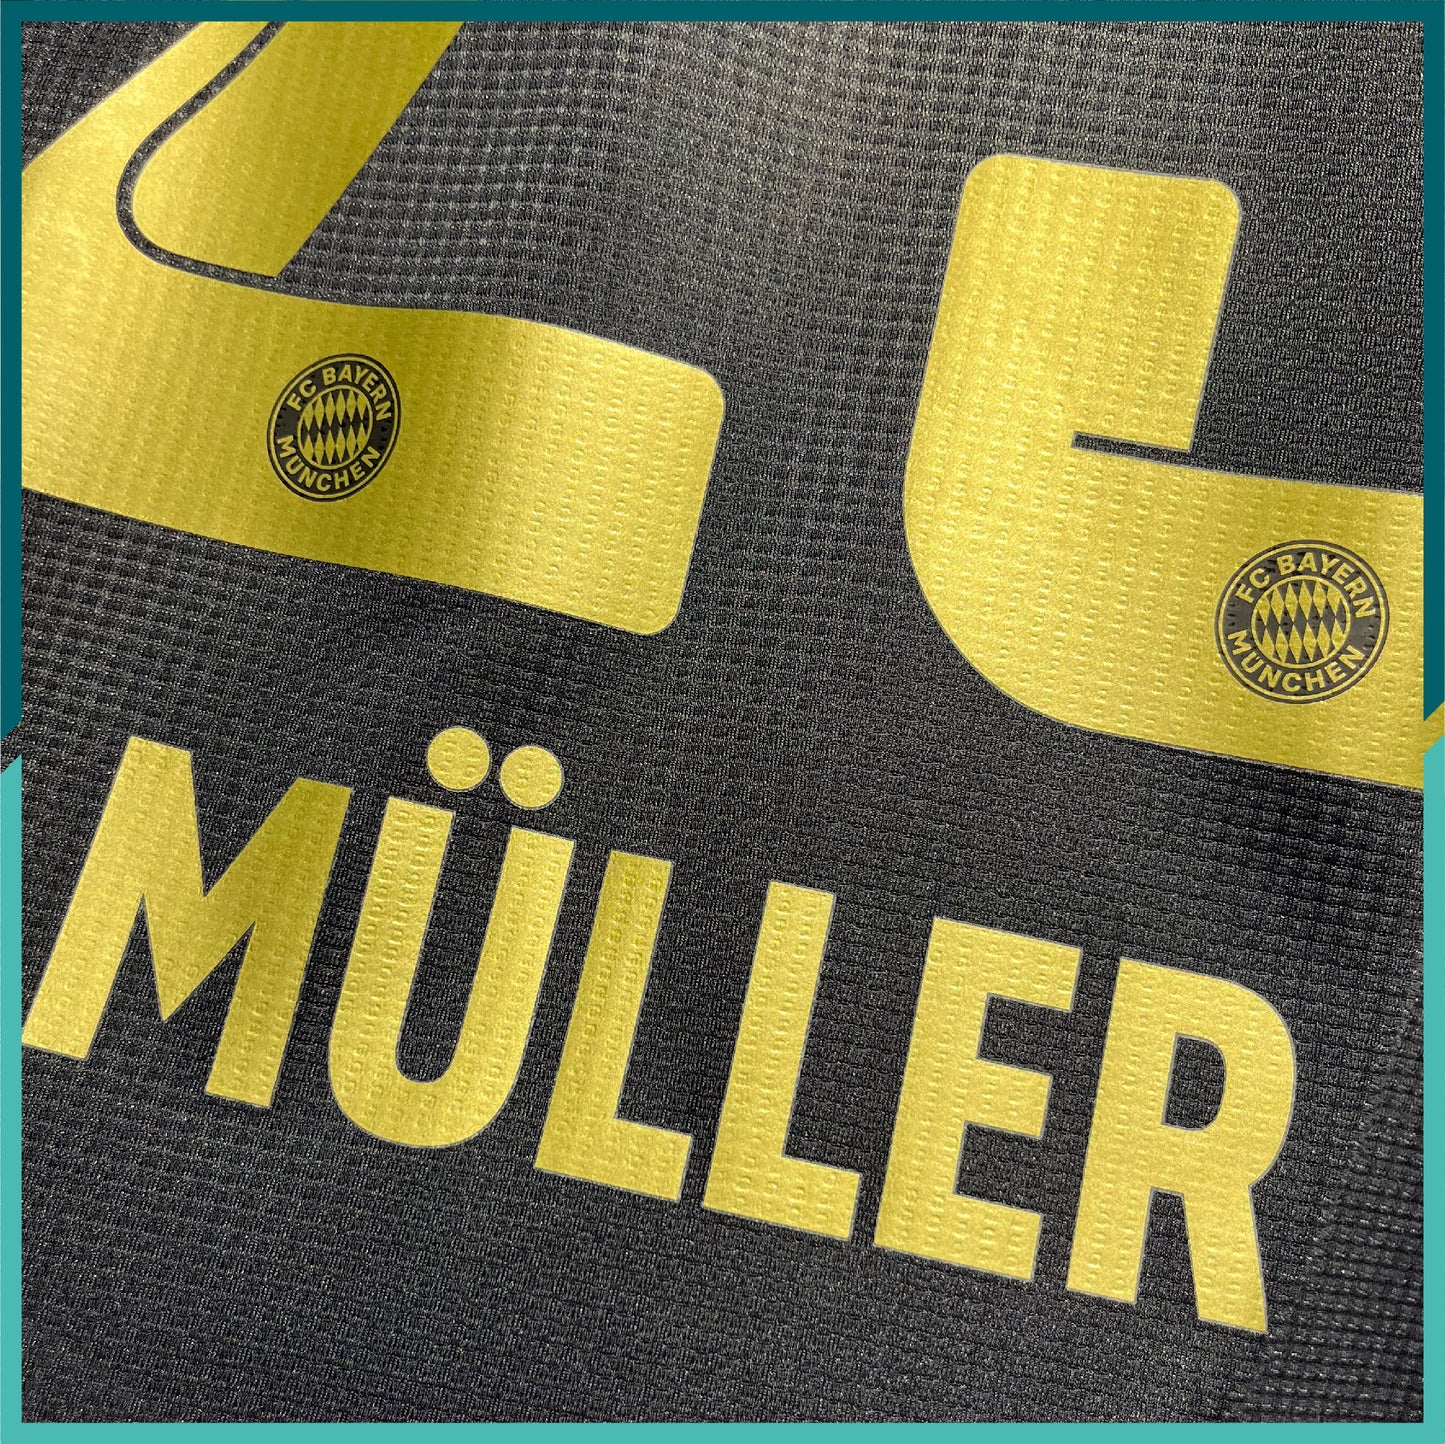 [Nameset & Patch Included] Authentic 2021-22 Bayern Munich Away Jersey